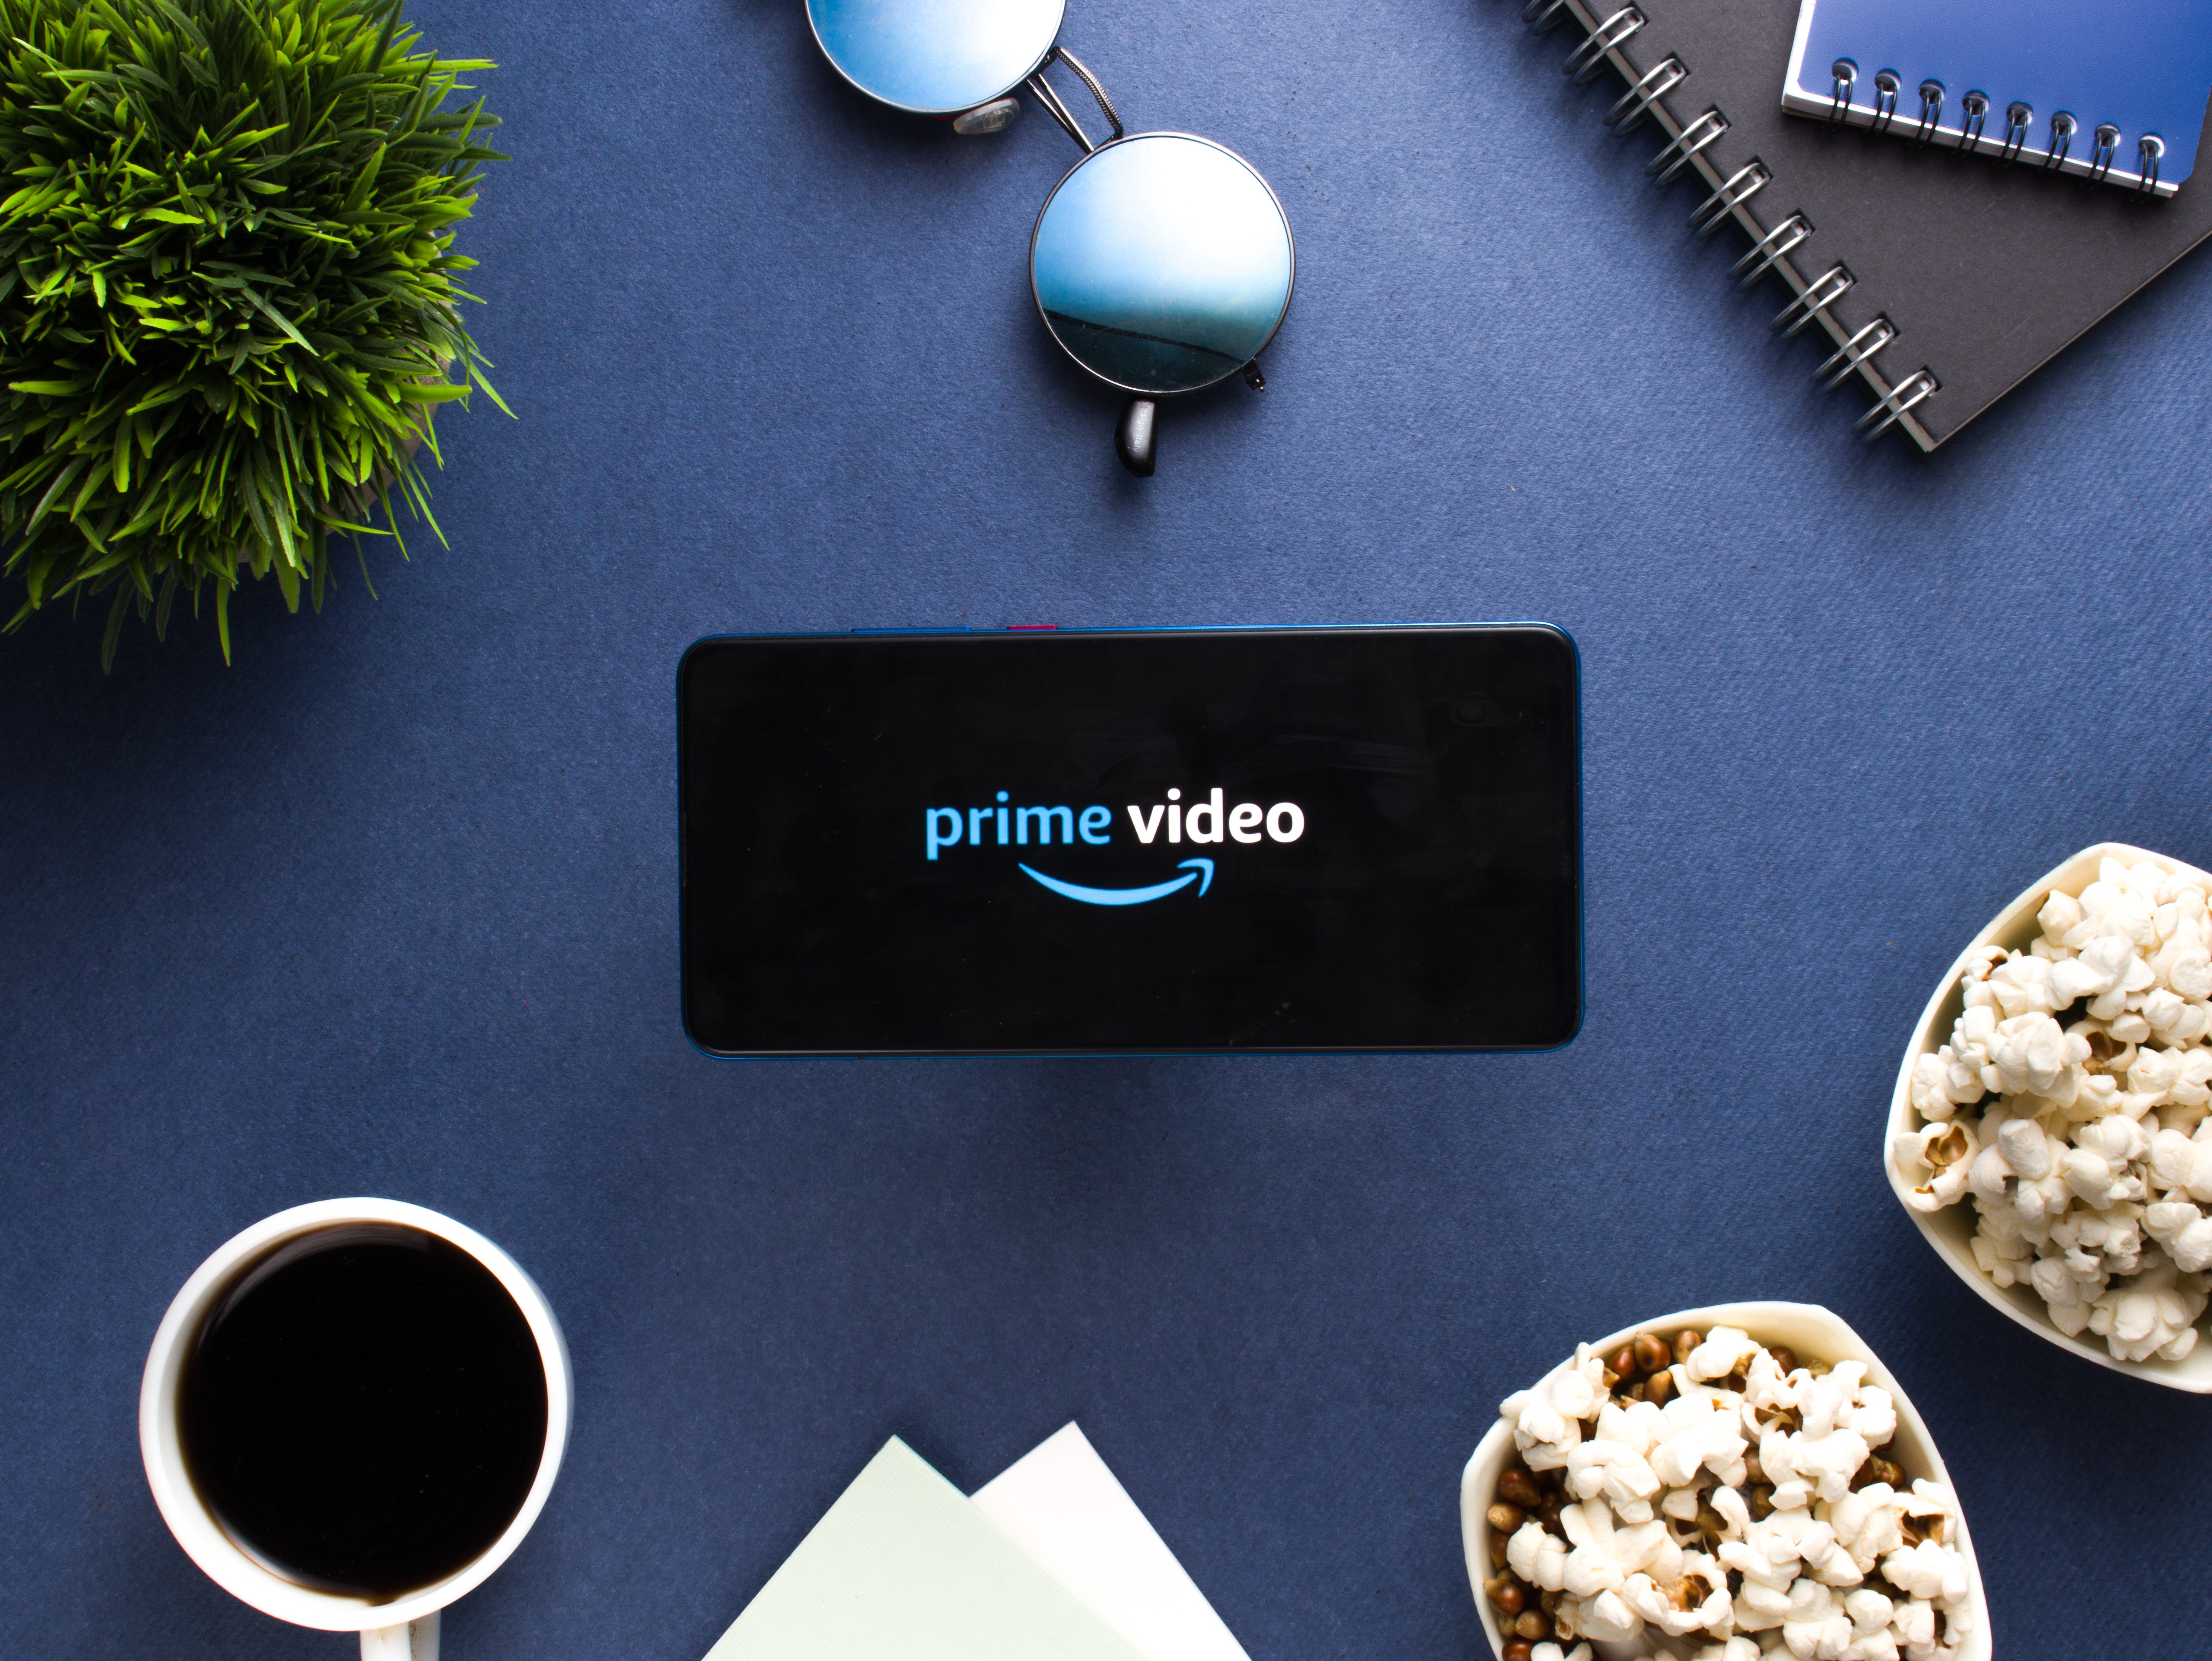 Amazon Prime Video Originals Will Soon Be Licensed To Other Streaming Services & Cable TV